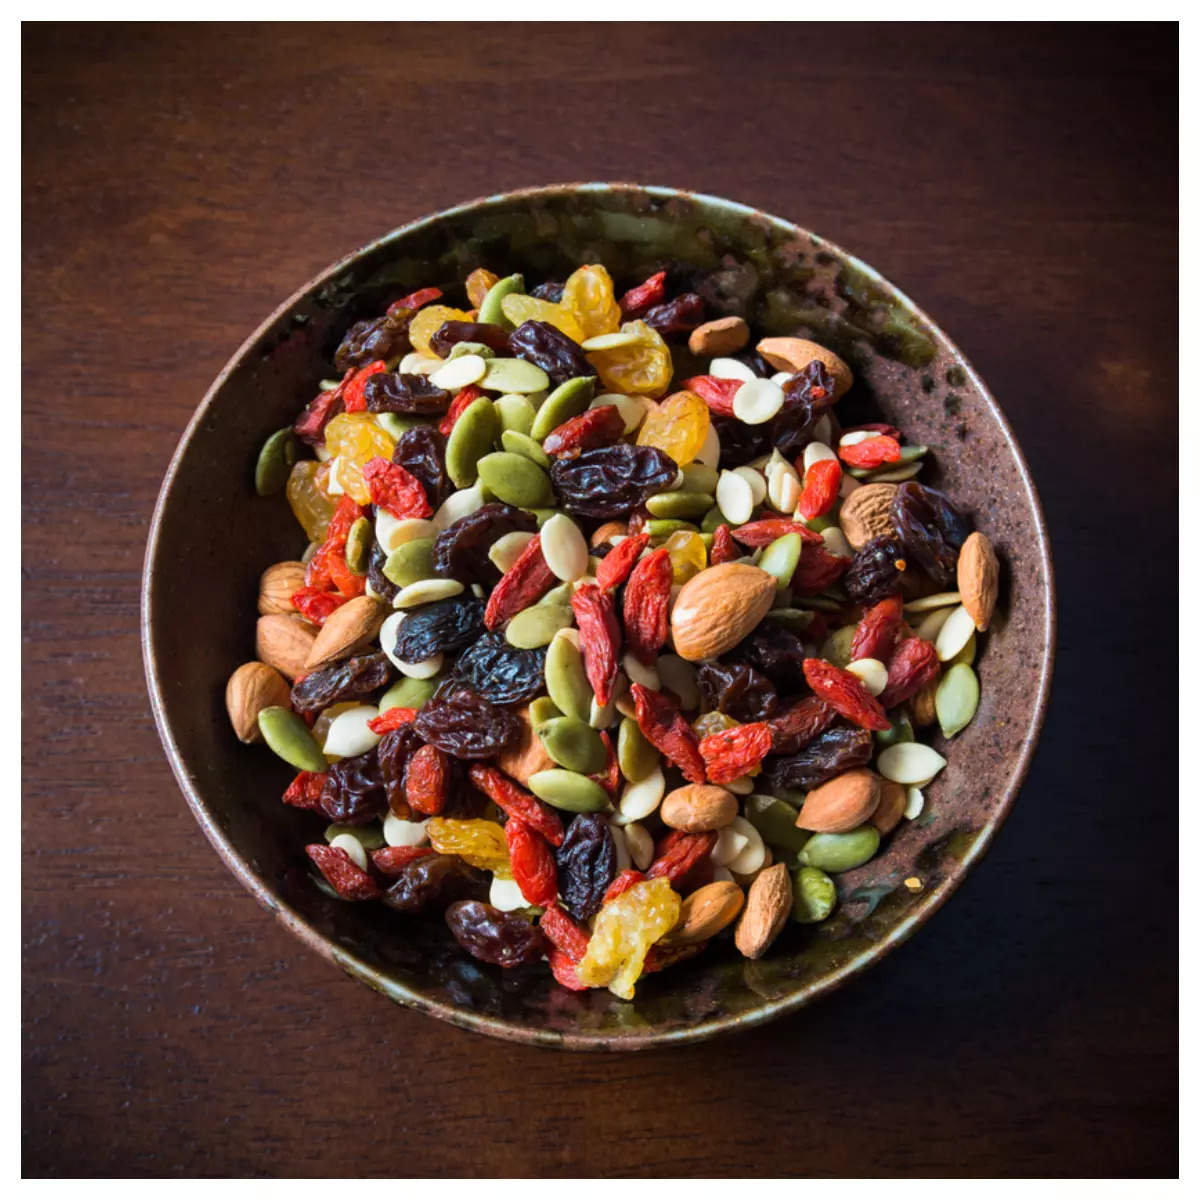 Indian-style Trail Mix Recipe: How to Make Indian-style Trail Mix